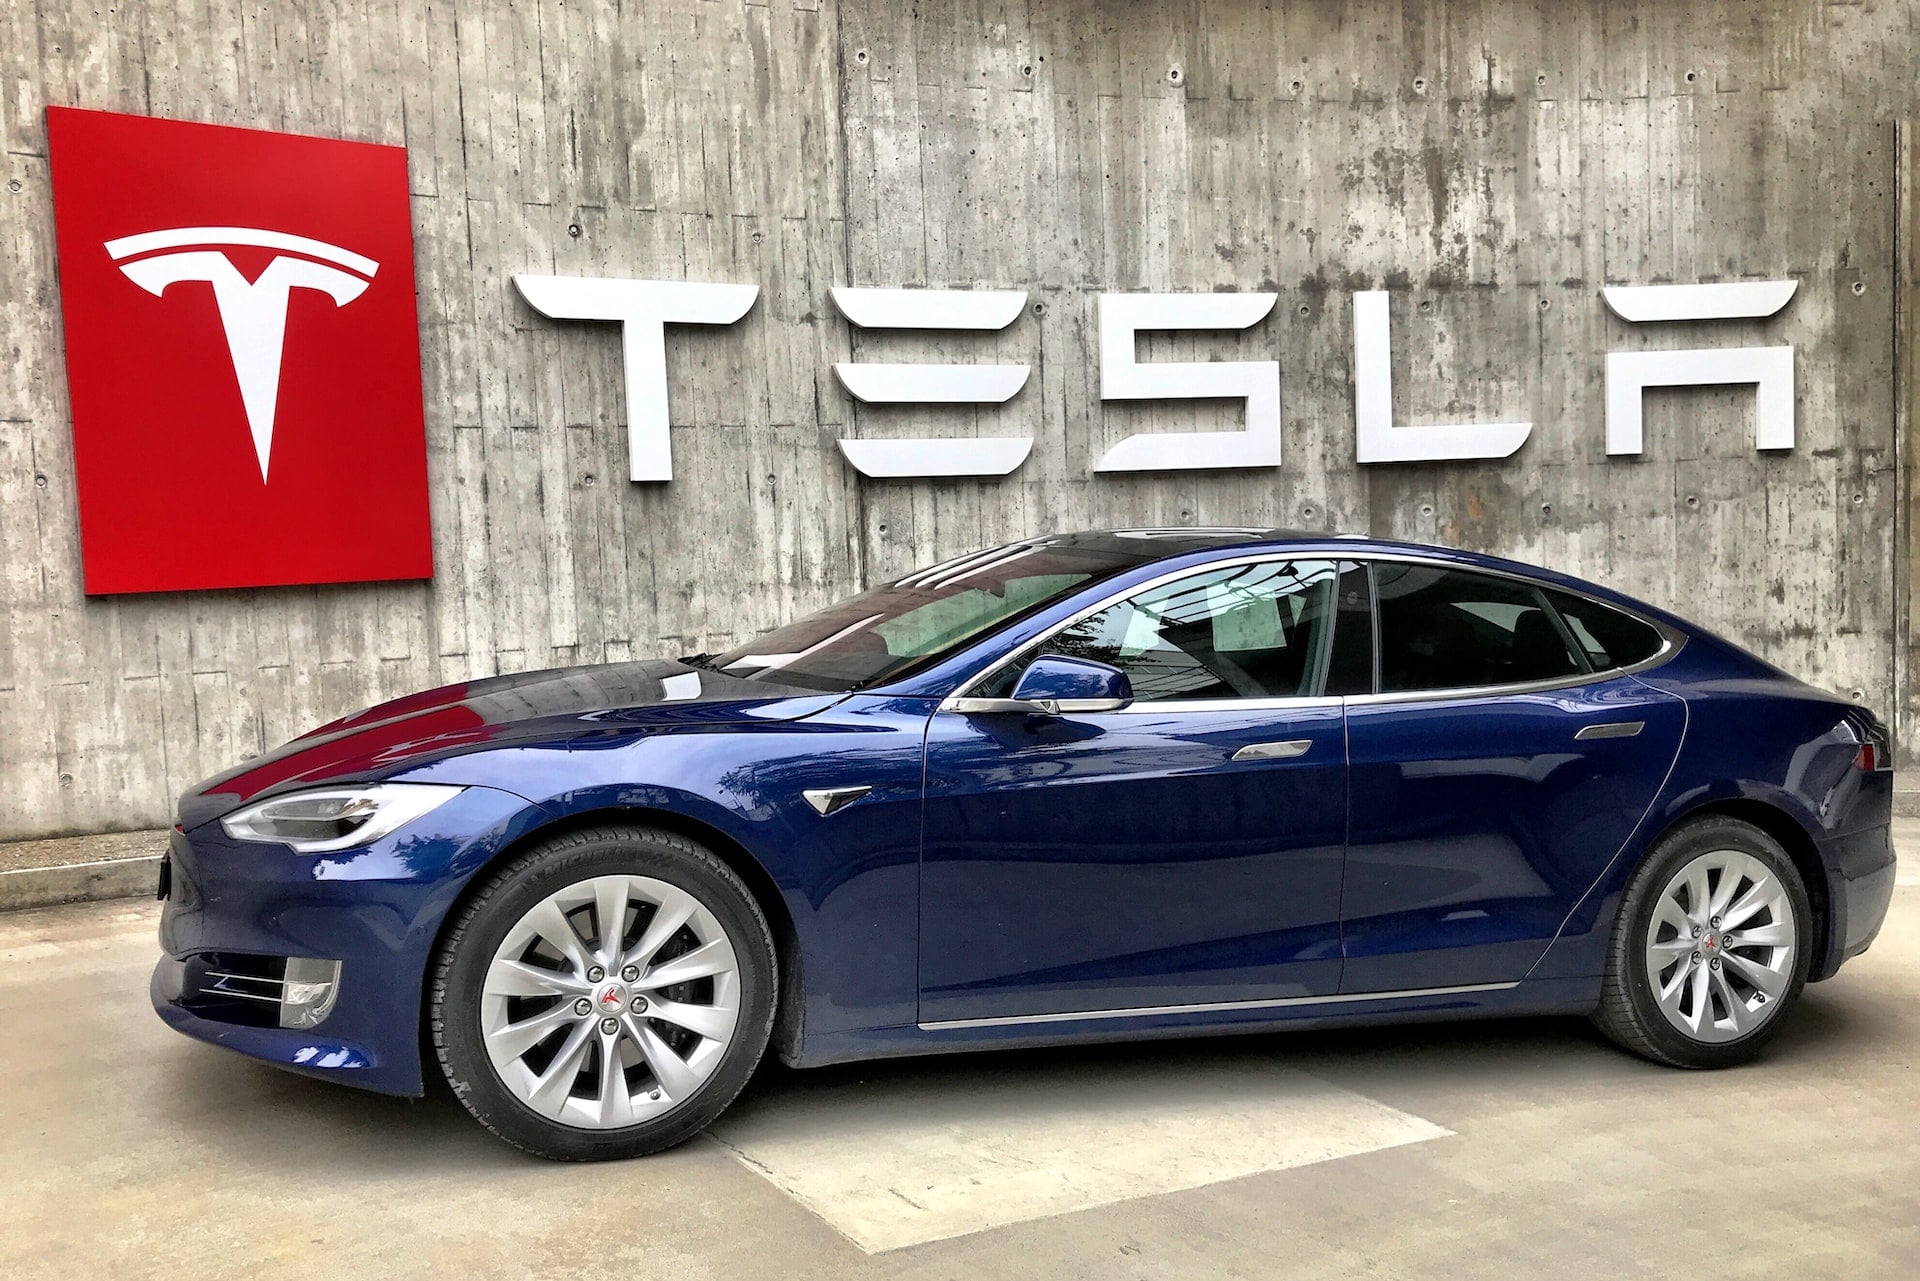 Will Tesla's Return Policy allow you to return your car